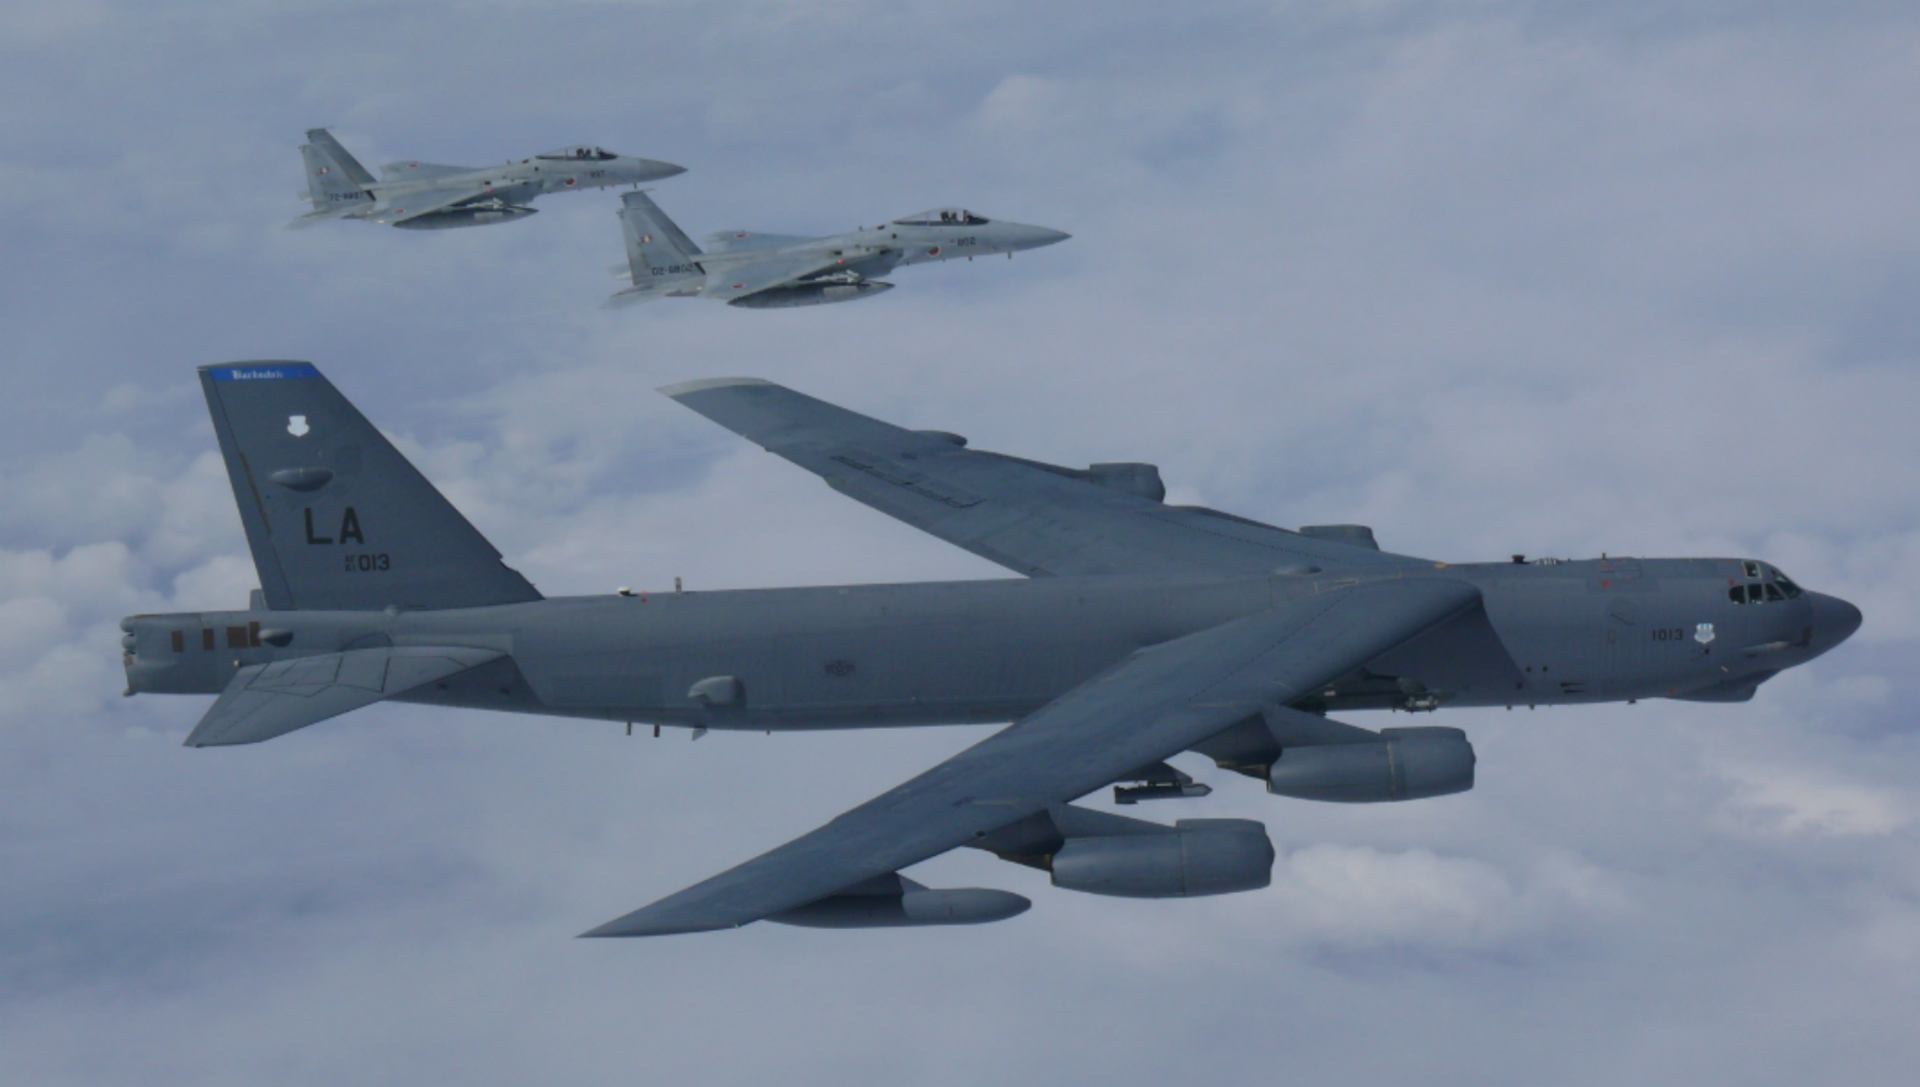 A B-52H Stratofortress bomber aircraft integrated with the Koku Jieitai (Japan Air Self Defense Force) while conducting a routine training mission in the East China Sea and Sea of Japan Sep. 26, 2018  - Sputnik International, 1920, 19.01.2023